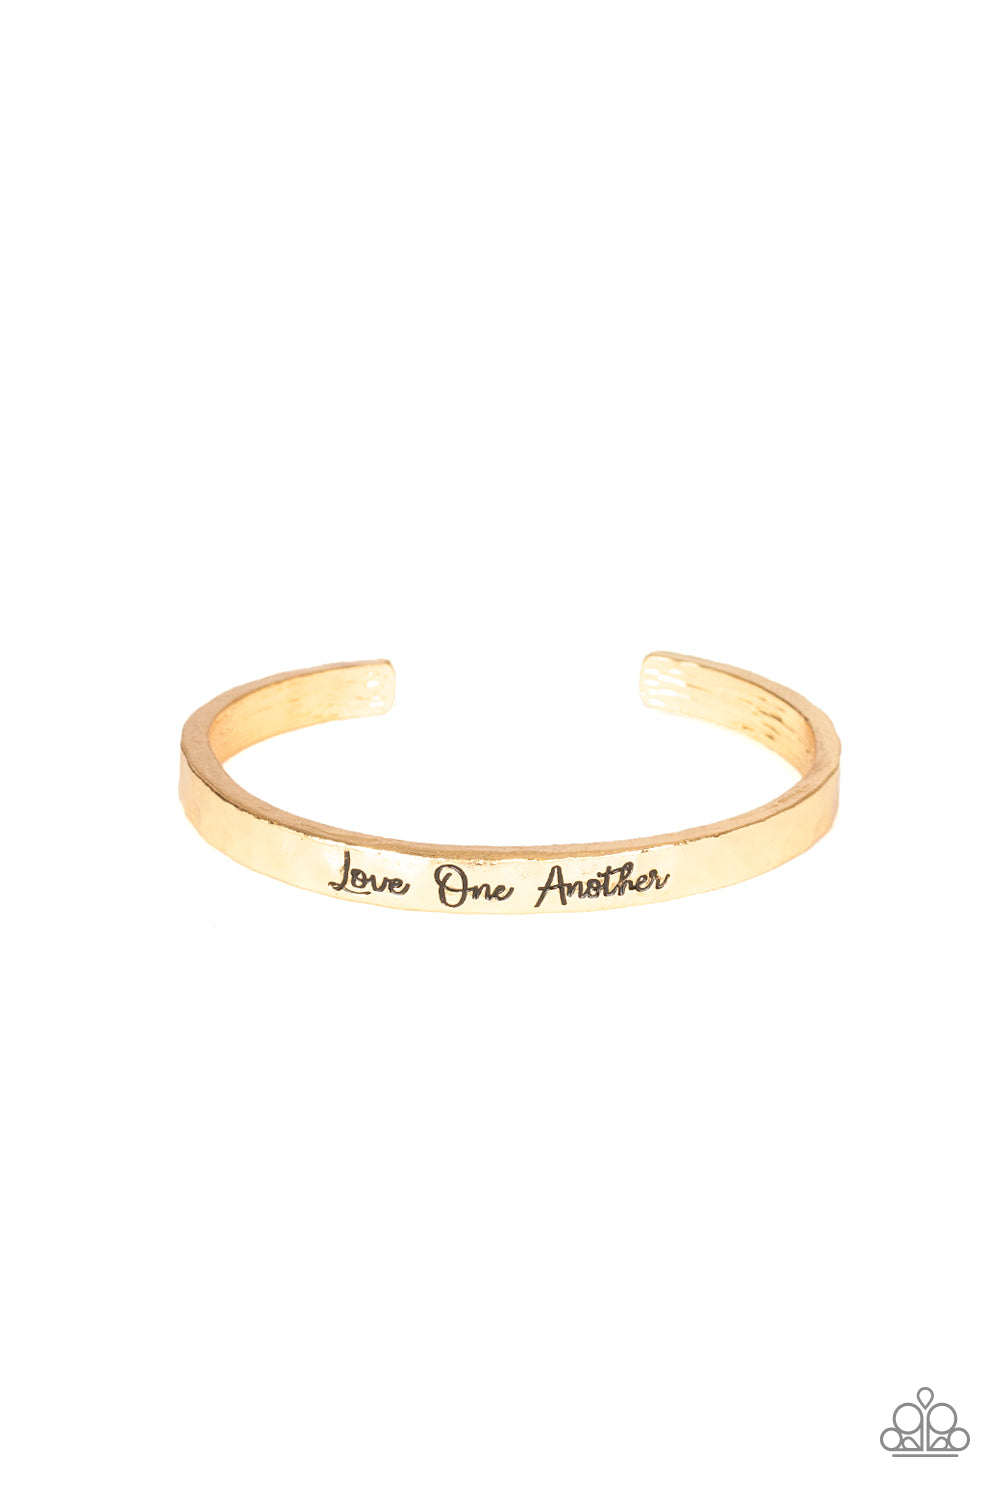 Paparazzi Bracelets cuff - Love One Another - Gold